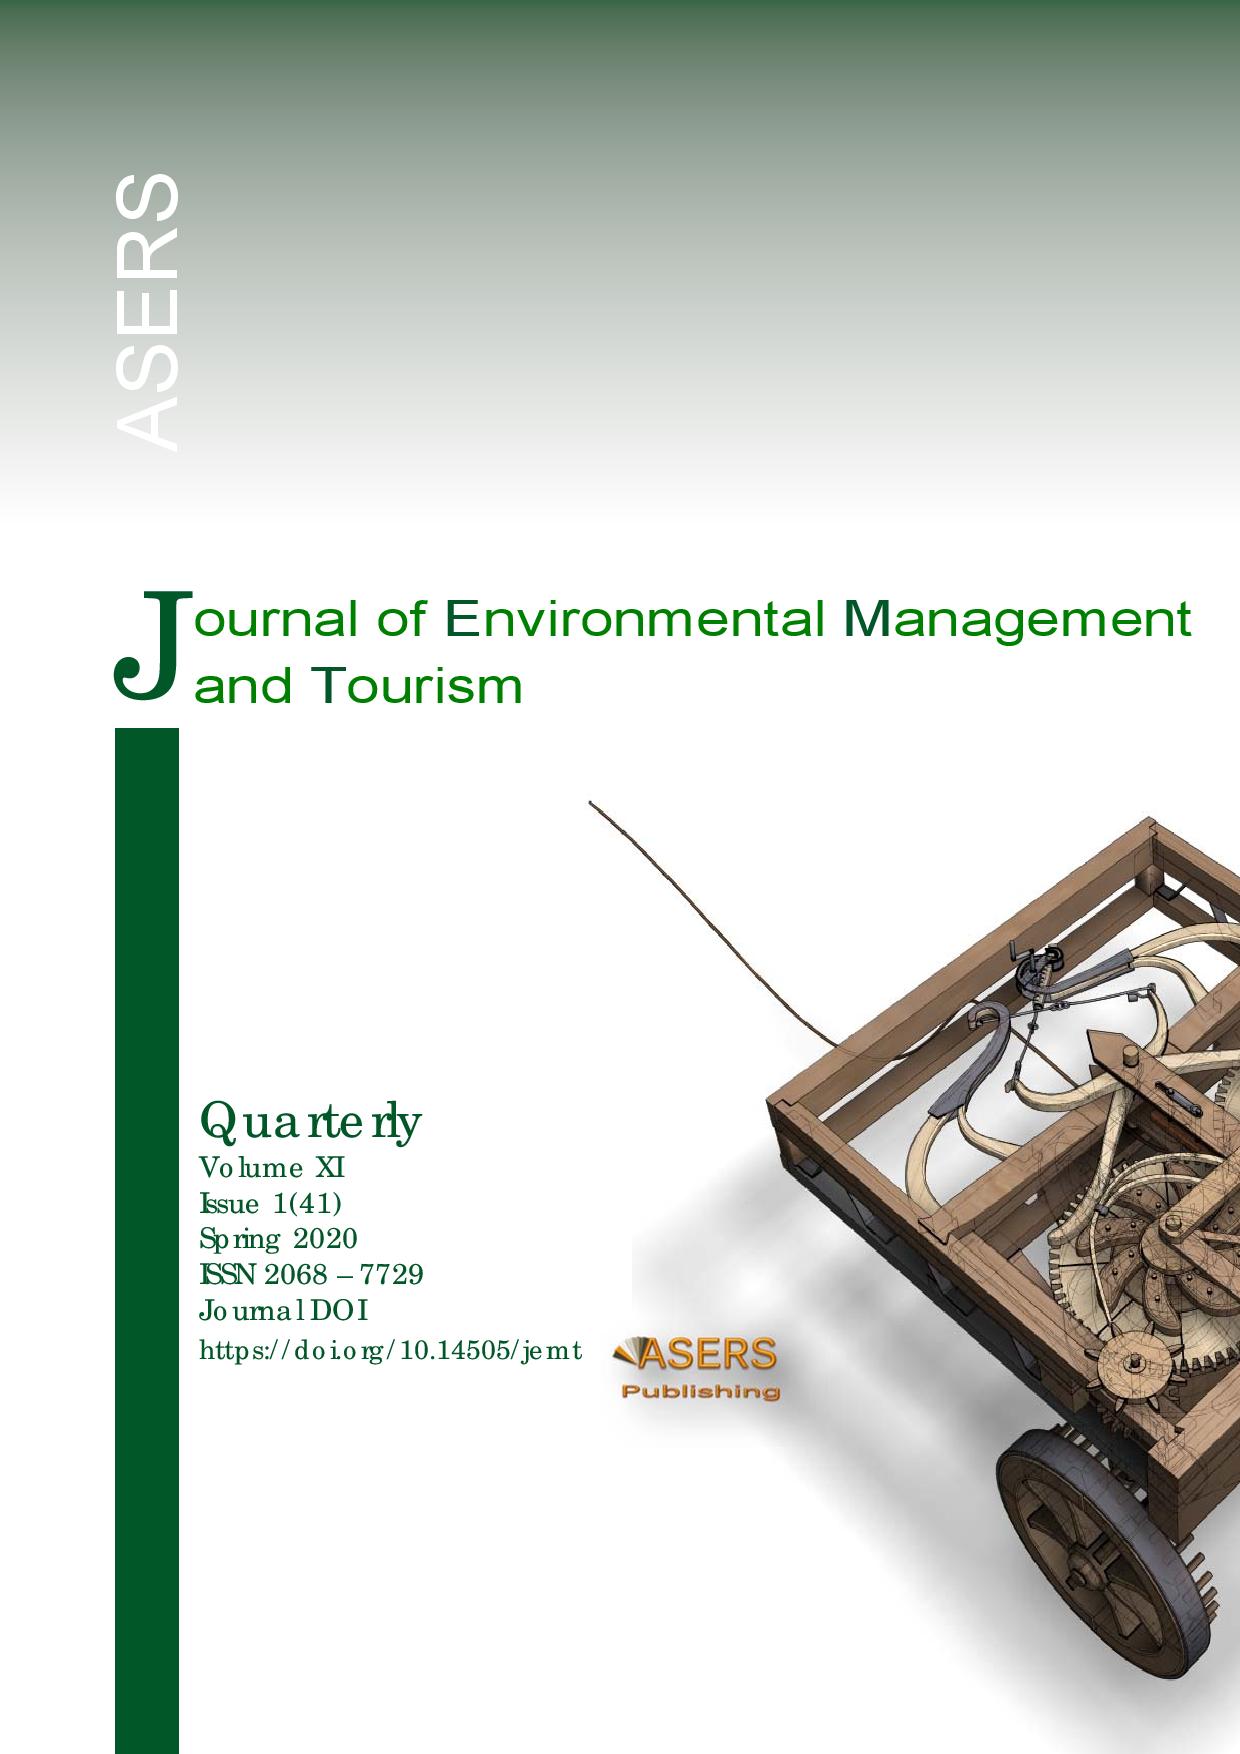 Geotourism Concept Development in the Basis of Environment Sustainability, Socioculture, and Natural Science Wealth: A Case Study in Indonesia Cover Image